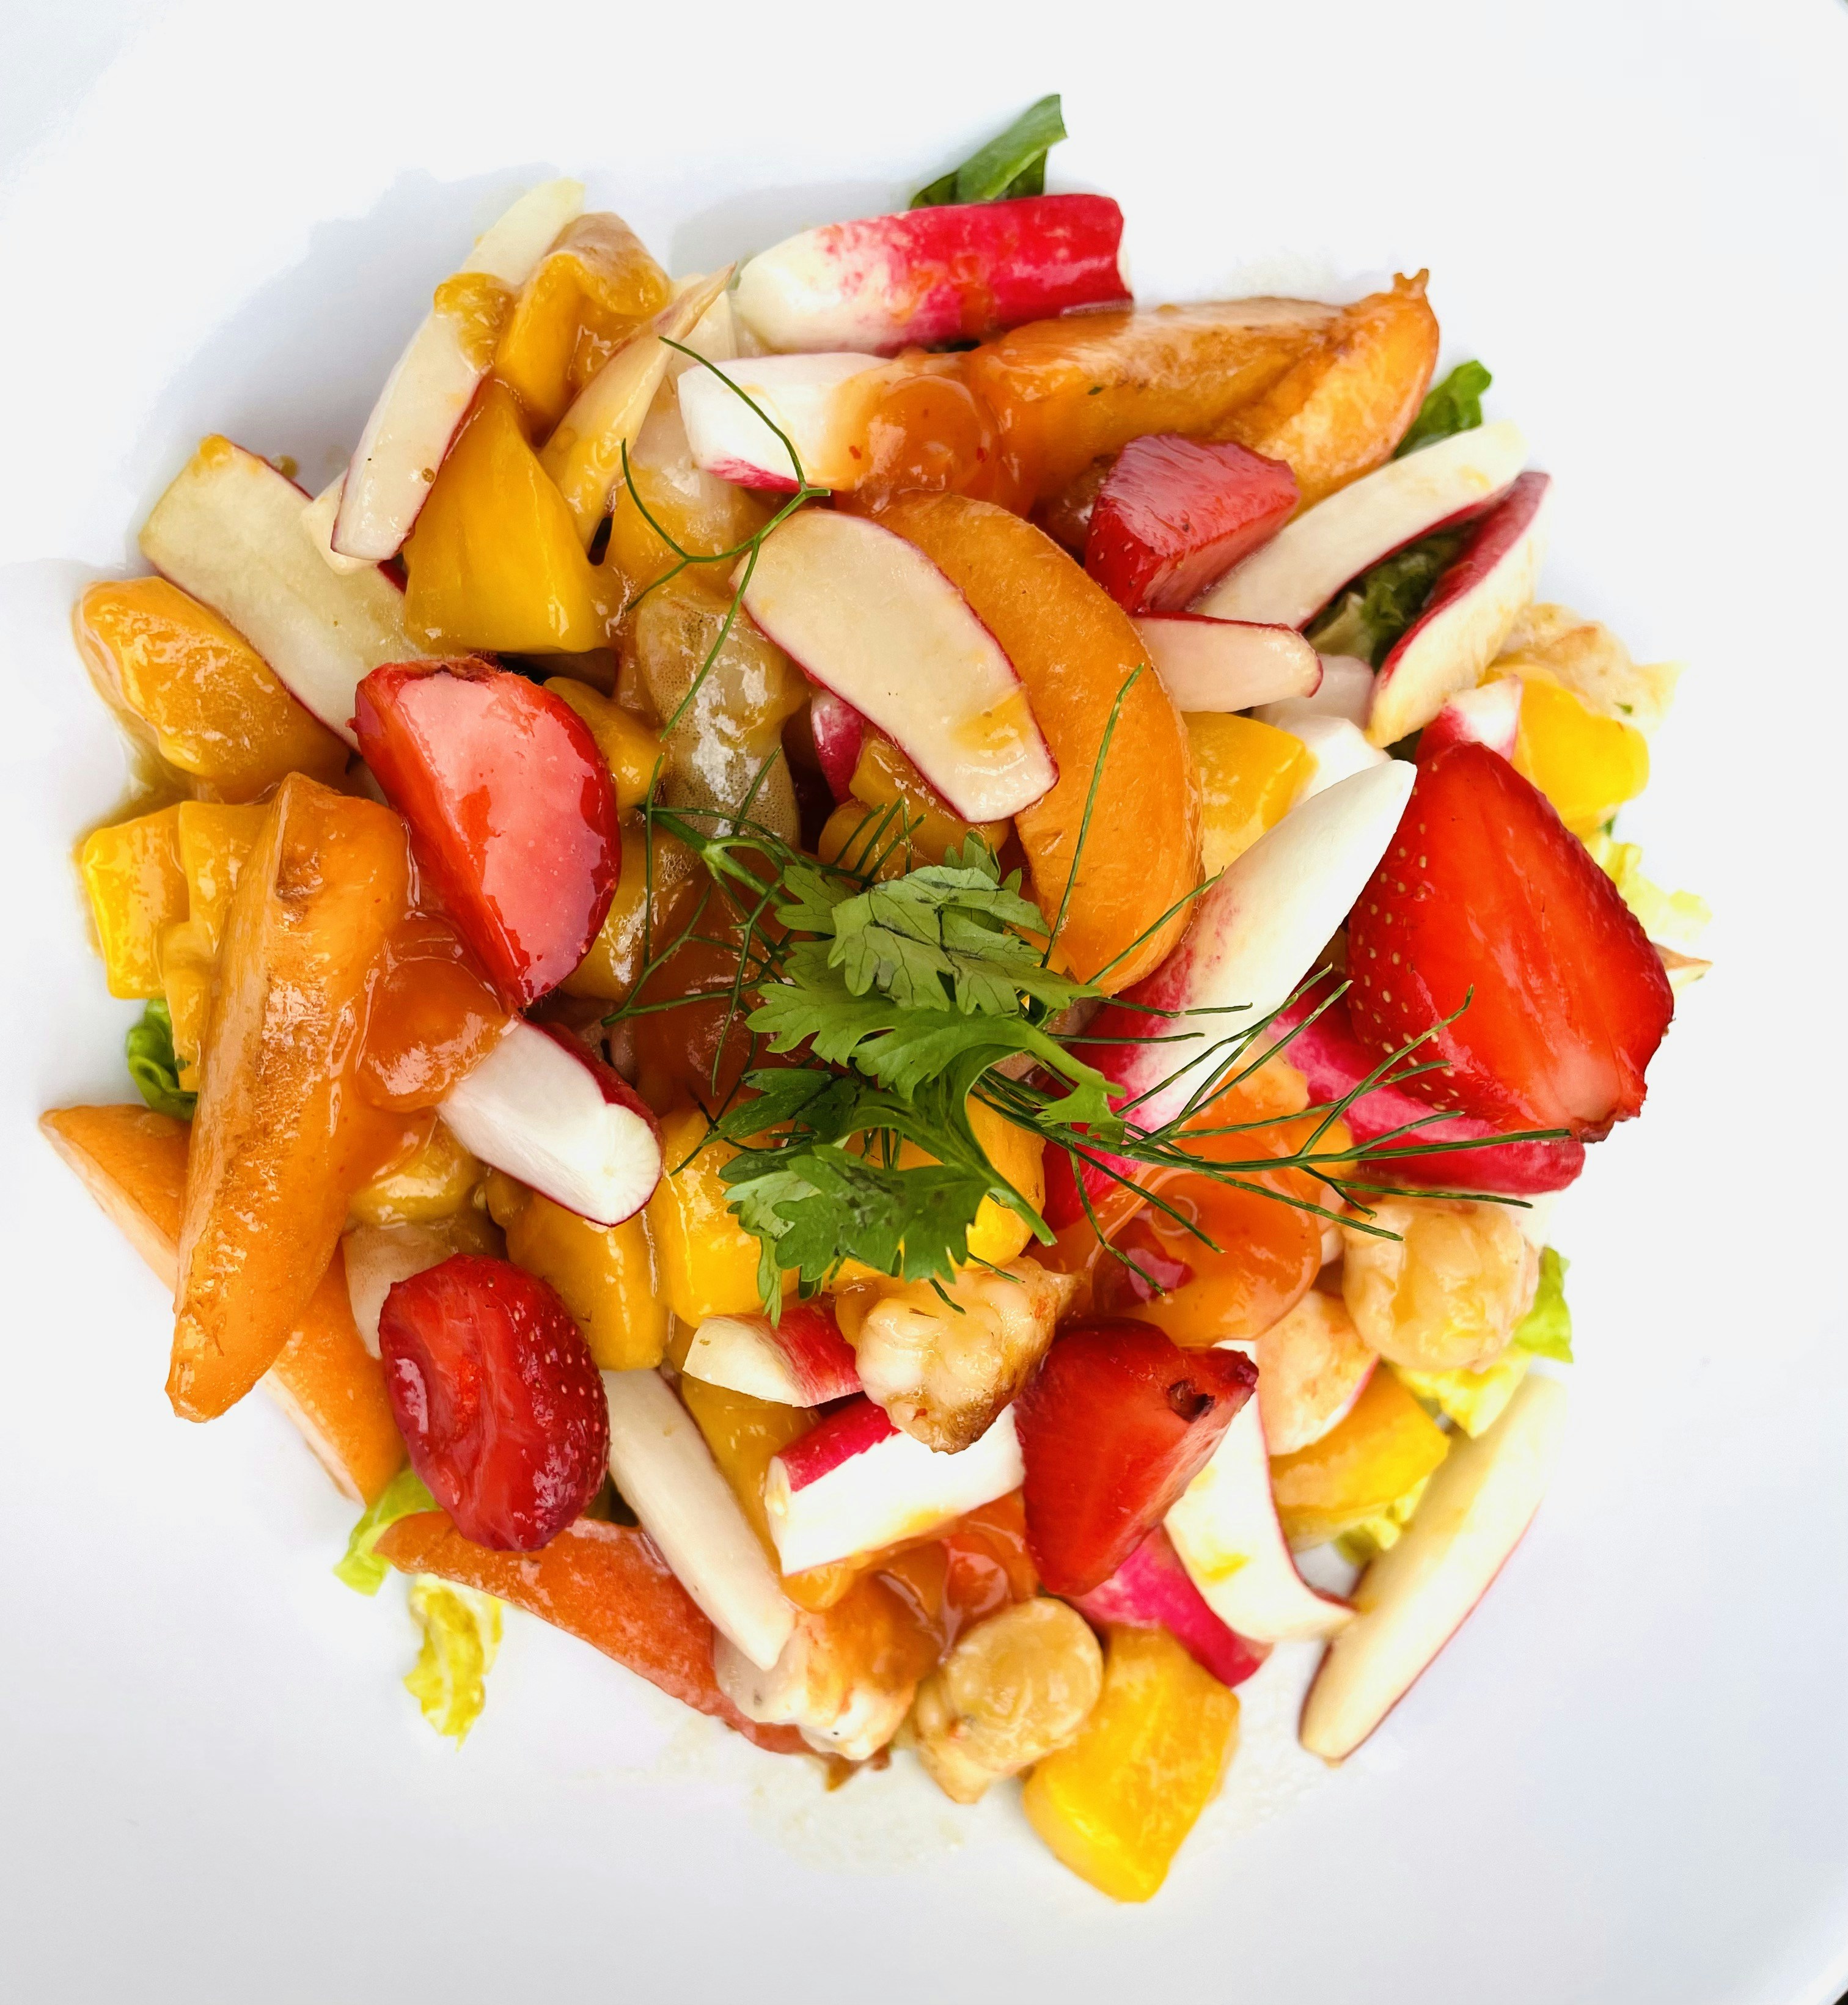 a fresh salad with a mix of fruits and vegetables